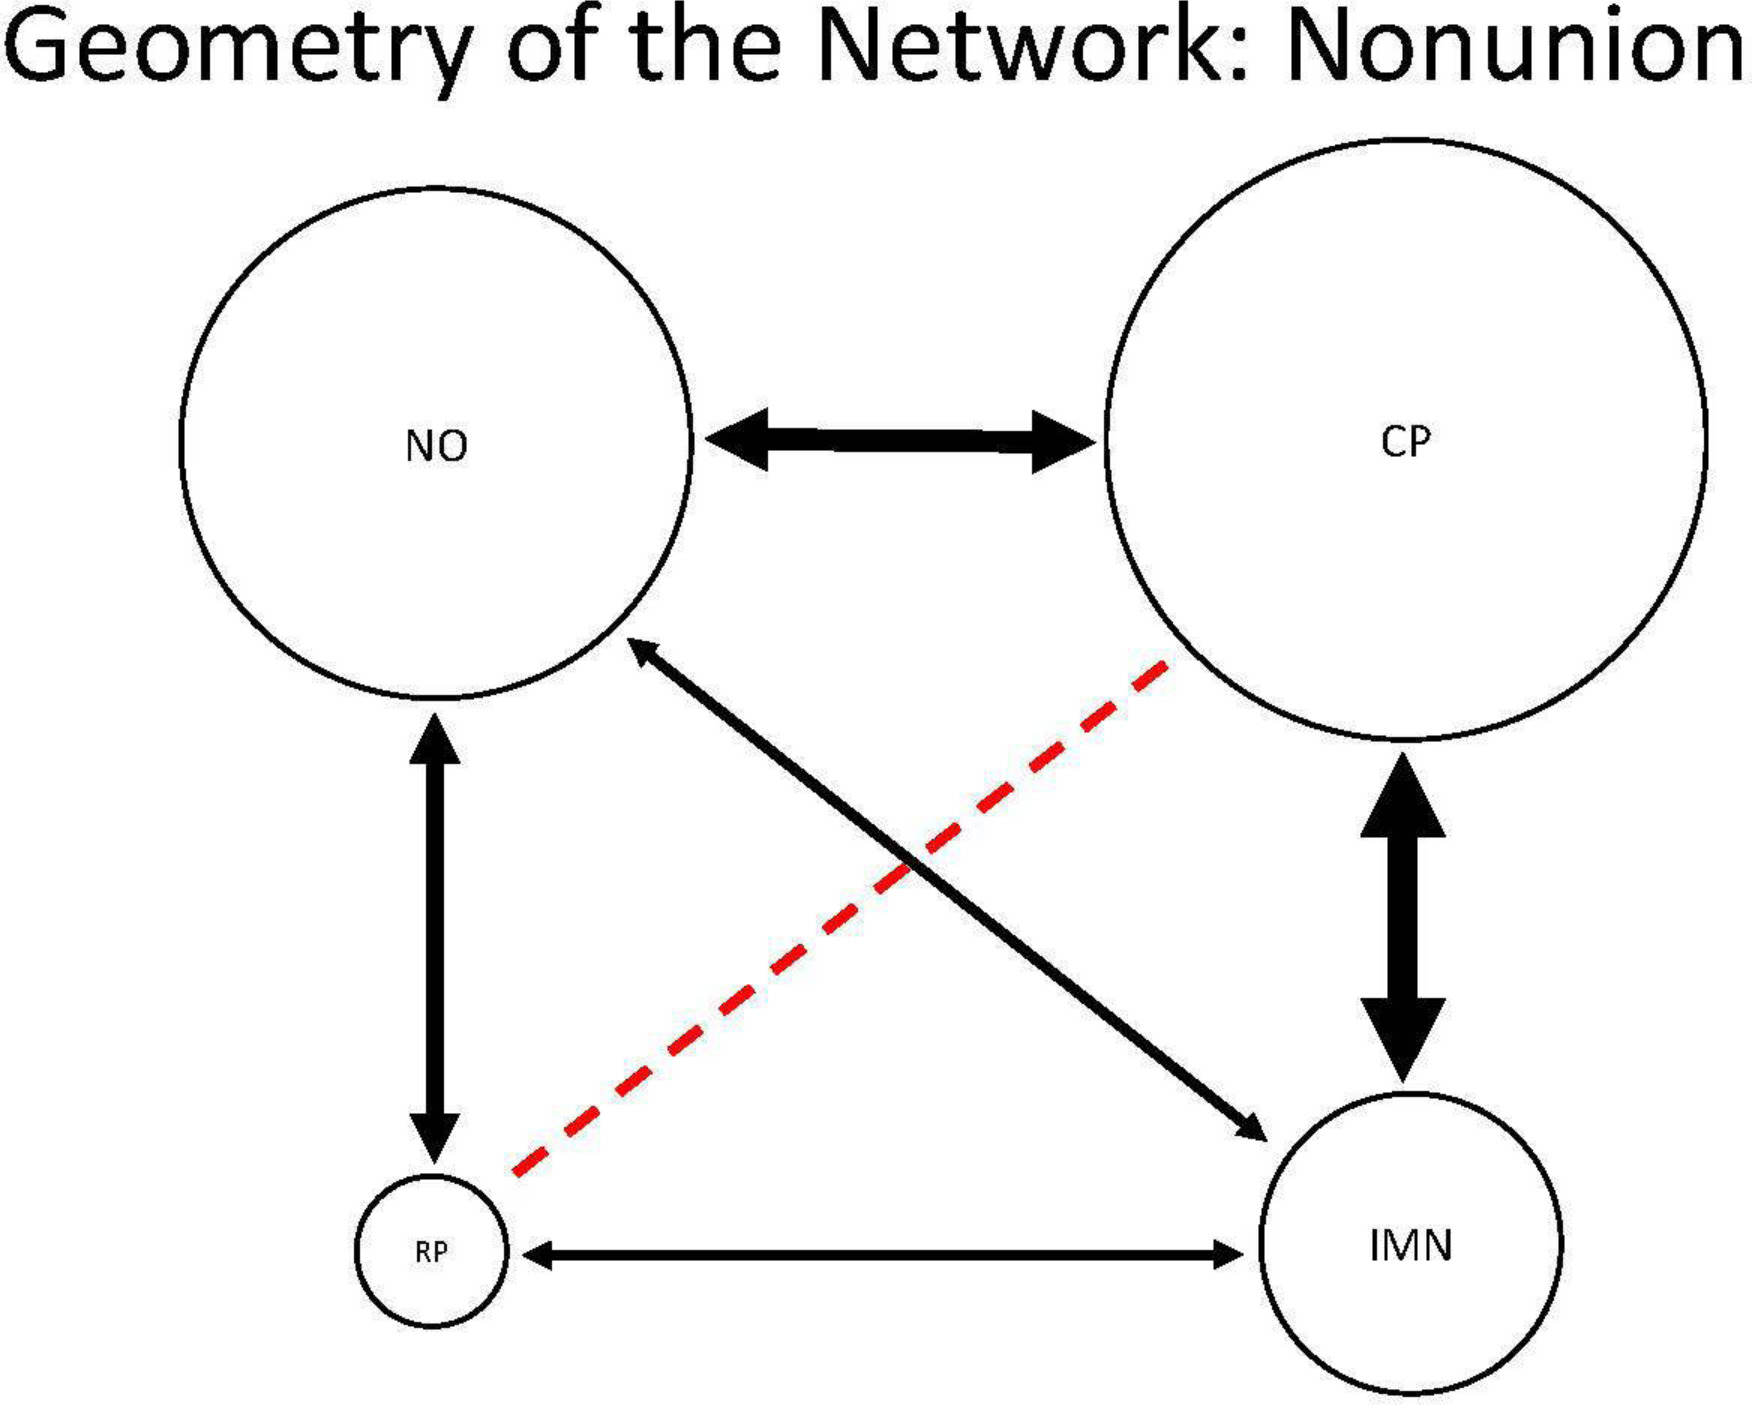 Fig. 1 
            Diagram demonstrating the geometry of the network for nonunions. Solid arrows represent direct estimates between treatment methods. Dashed line represents indirect estimates made between compression plating and reconstruction plating. CP, compression plate; IMN, intramedullary nail; NO, nonoperative management; RP, reconstruction plate.
          